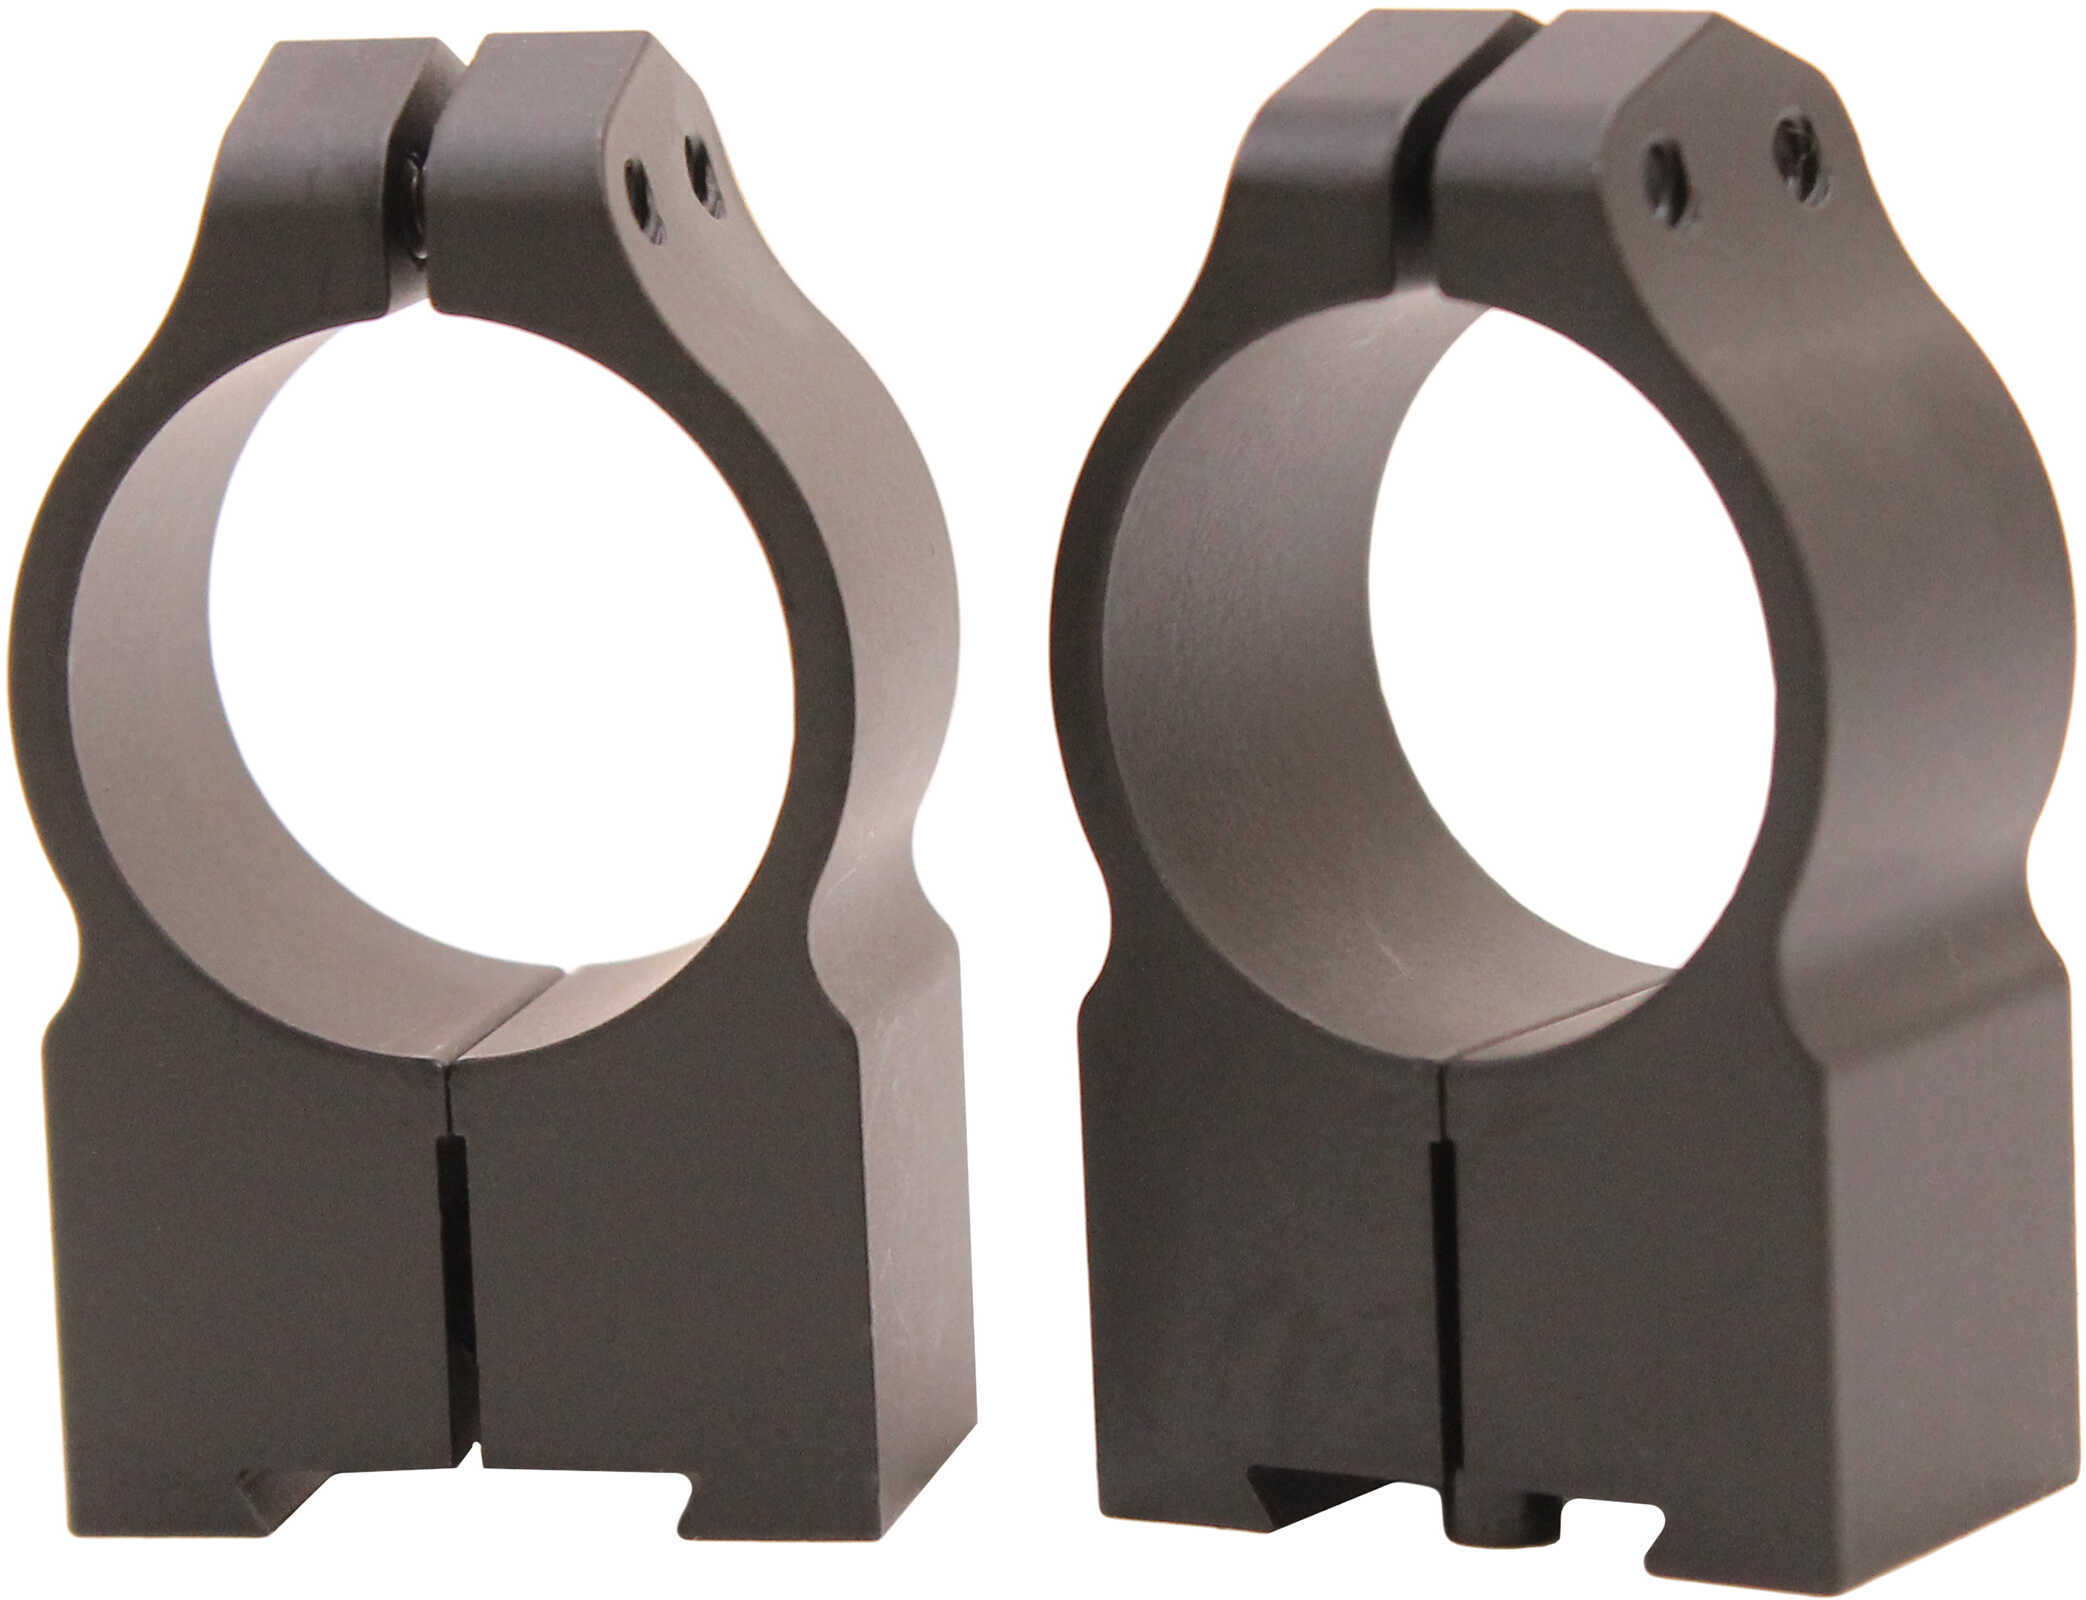 Warne Scope Mounts Permanent Attached Fixed Ring Set Fits Tikka Grooved Receiver 1" High Matte Finish 2TM